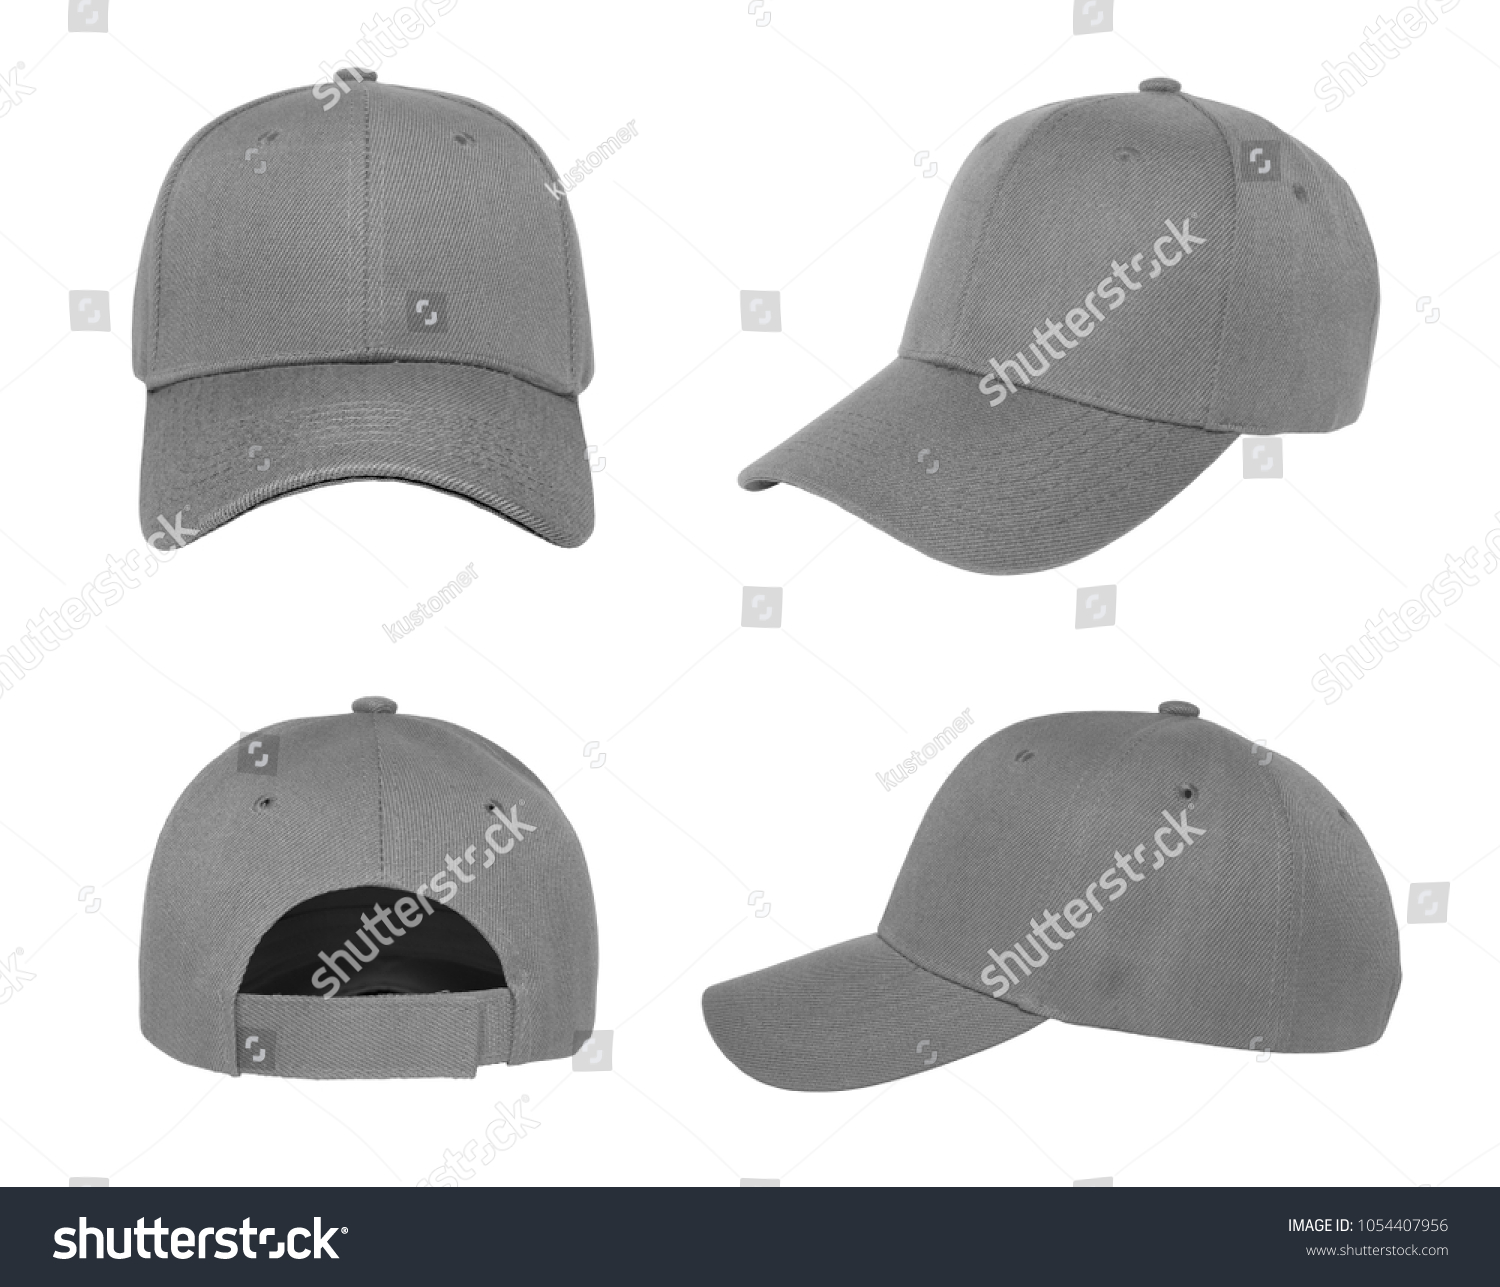 Blank baseball cap 4 view color grey on white background #1054407956